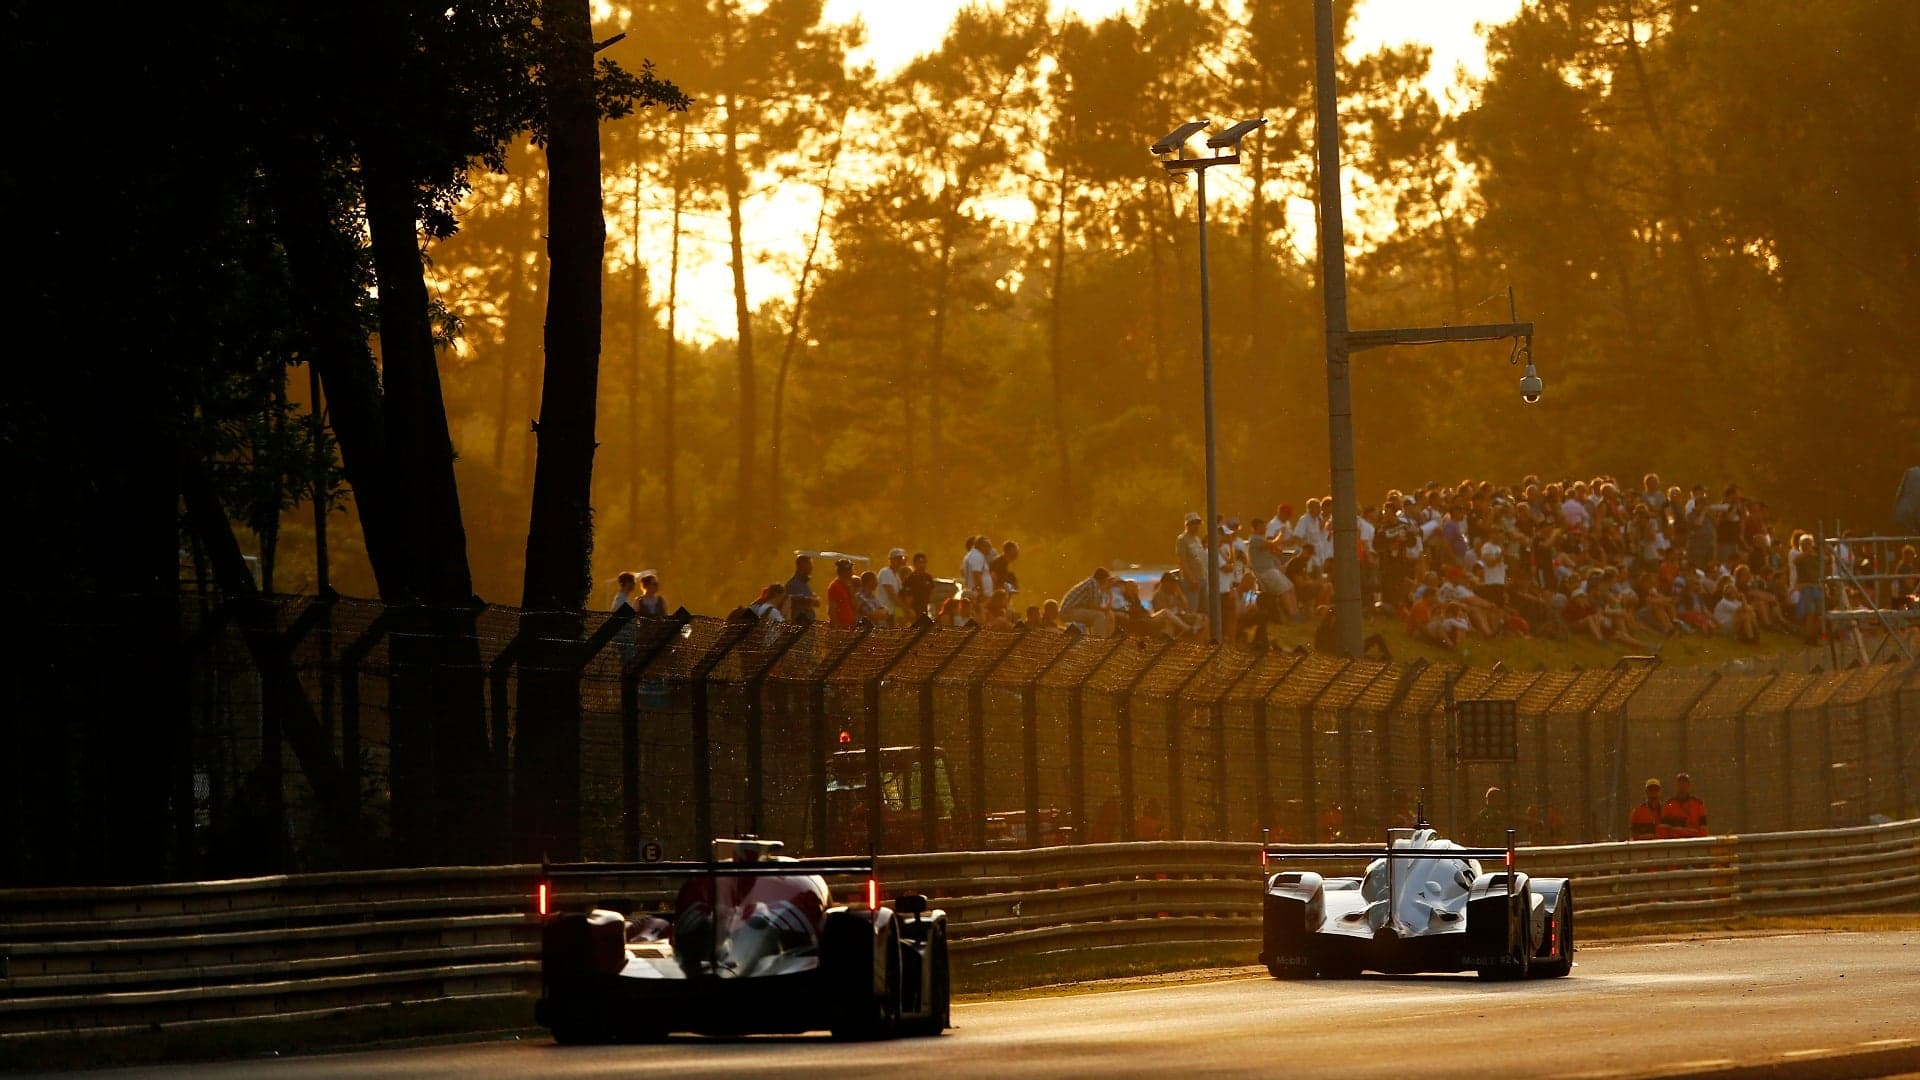 Porsche 919 Hybrids Settle For Second Row In Le Mans Qualifying